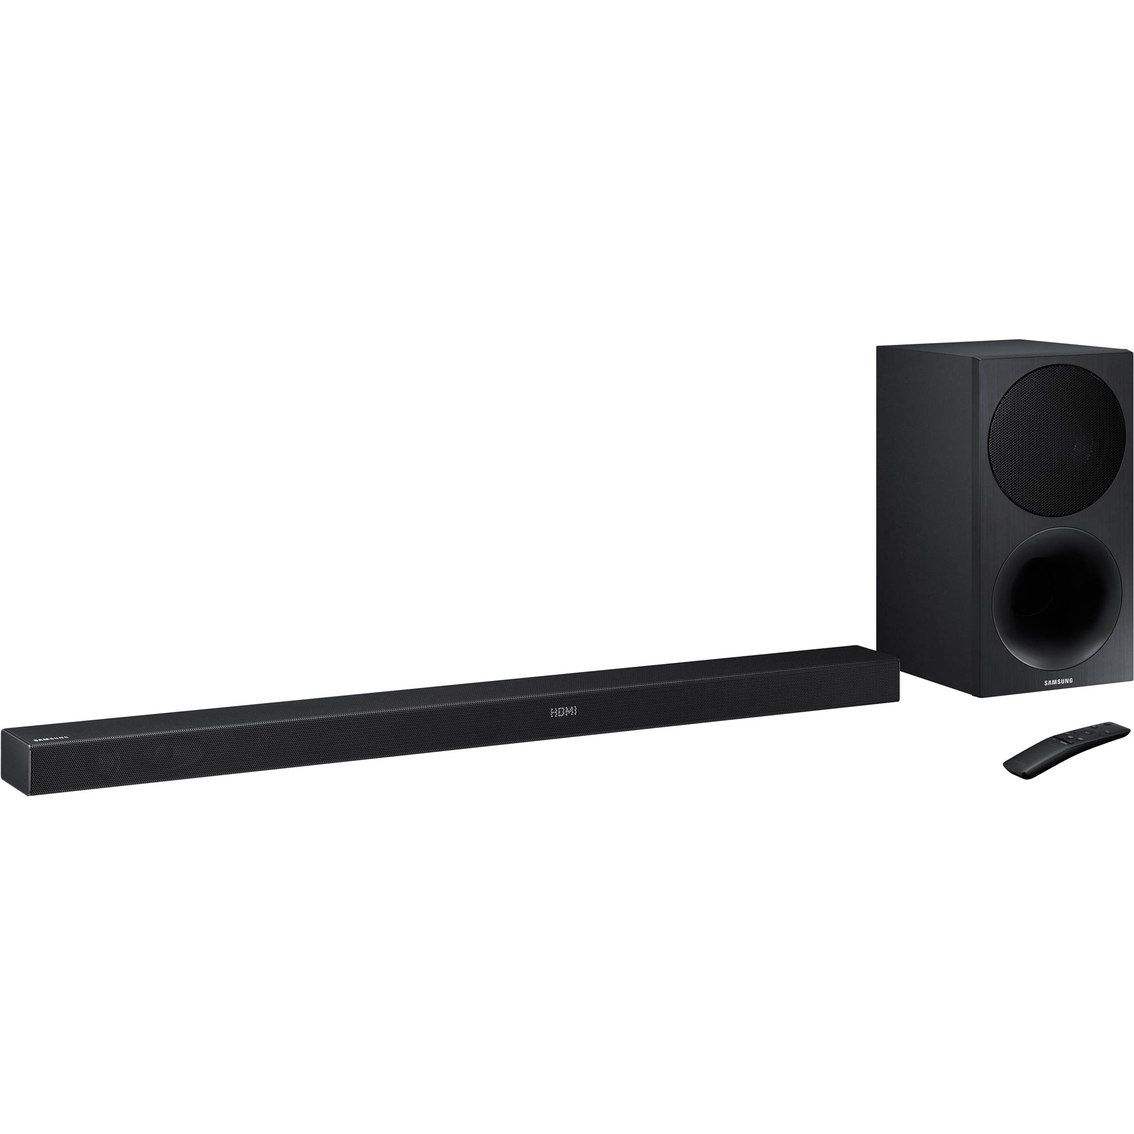 Samsung 3.1-Channel Soundbar System with Wireless Subwoofer - Image 1 of 4